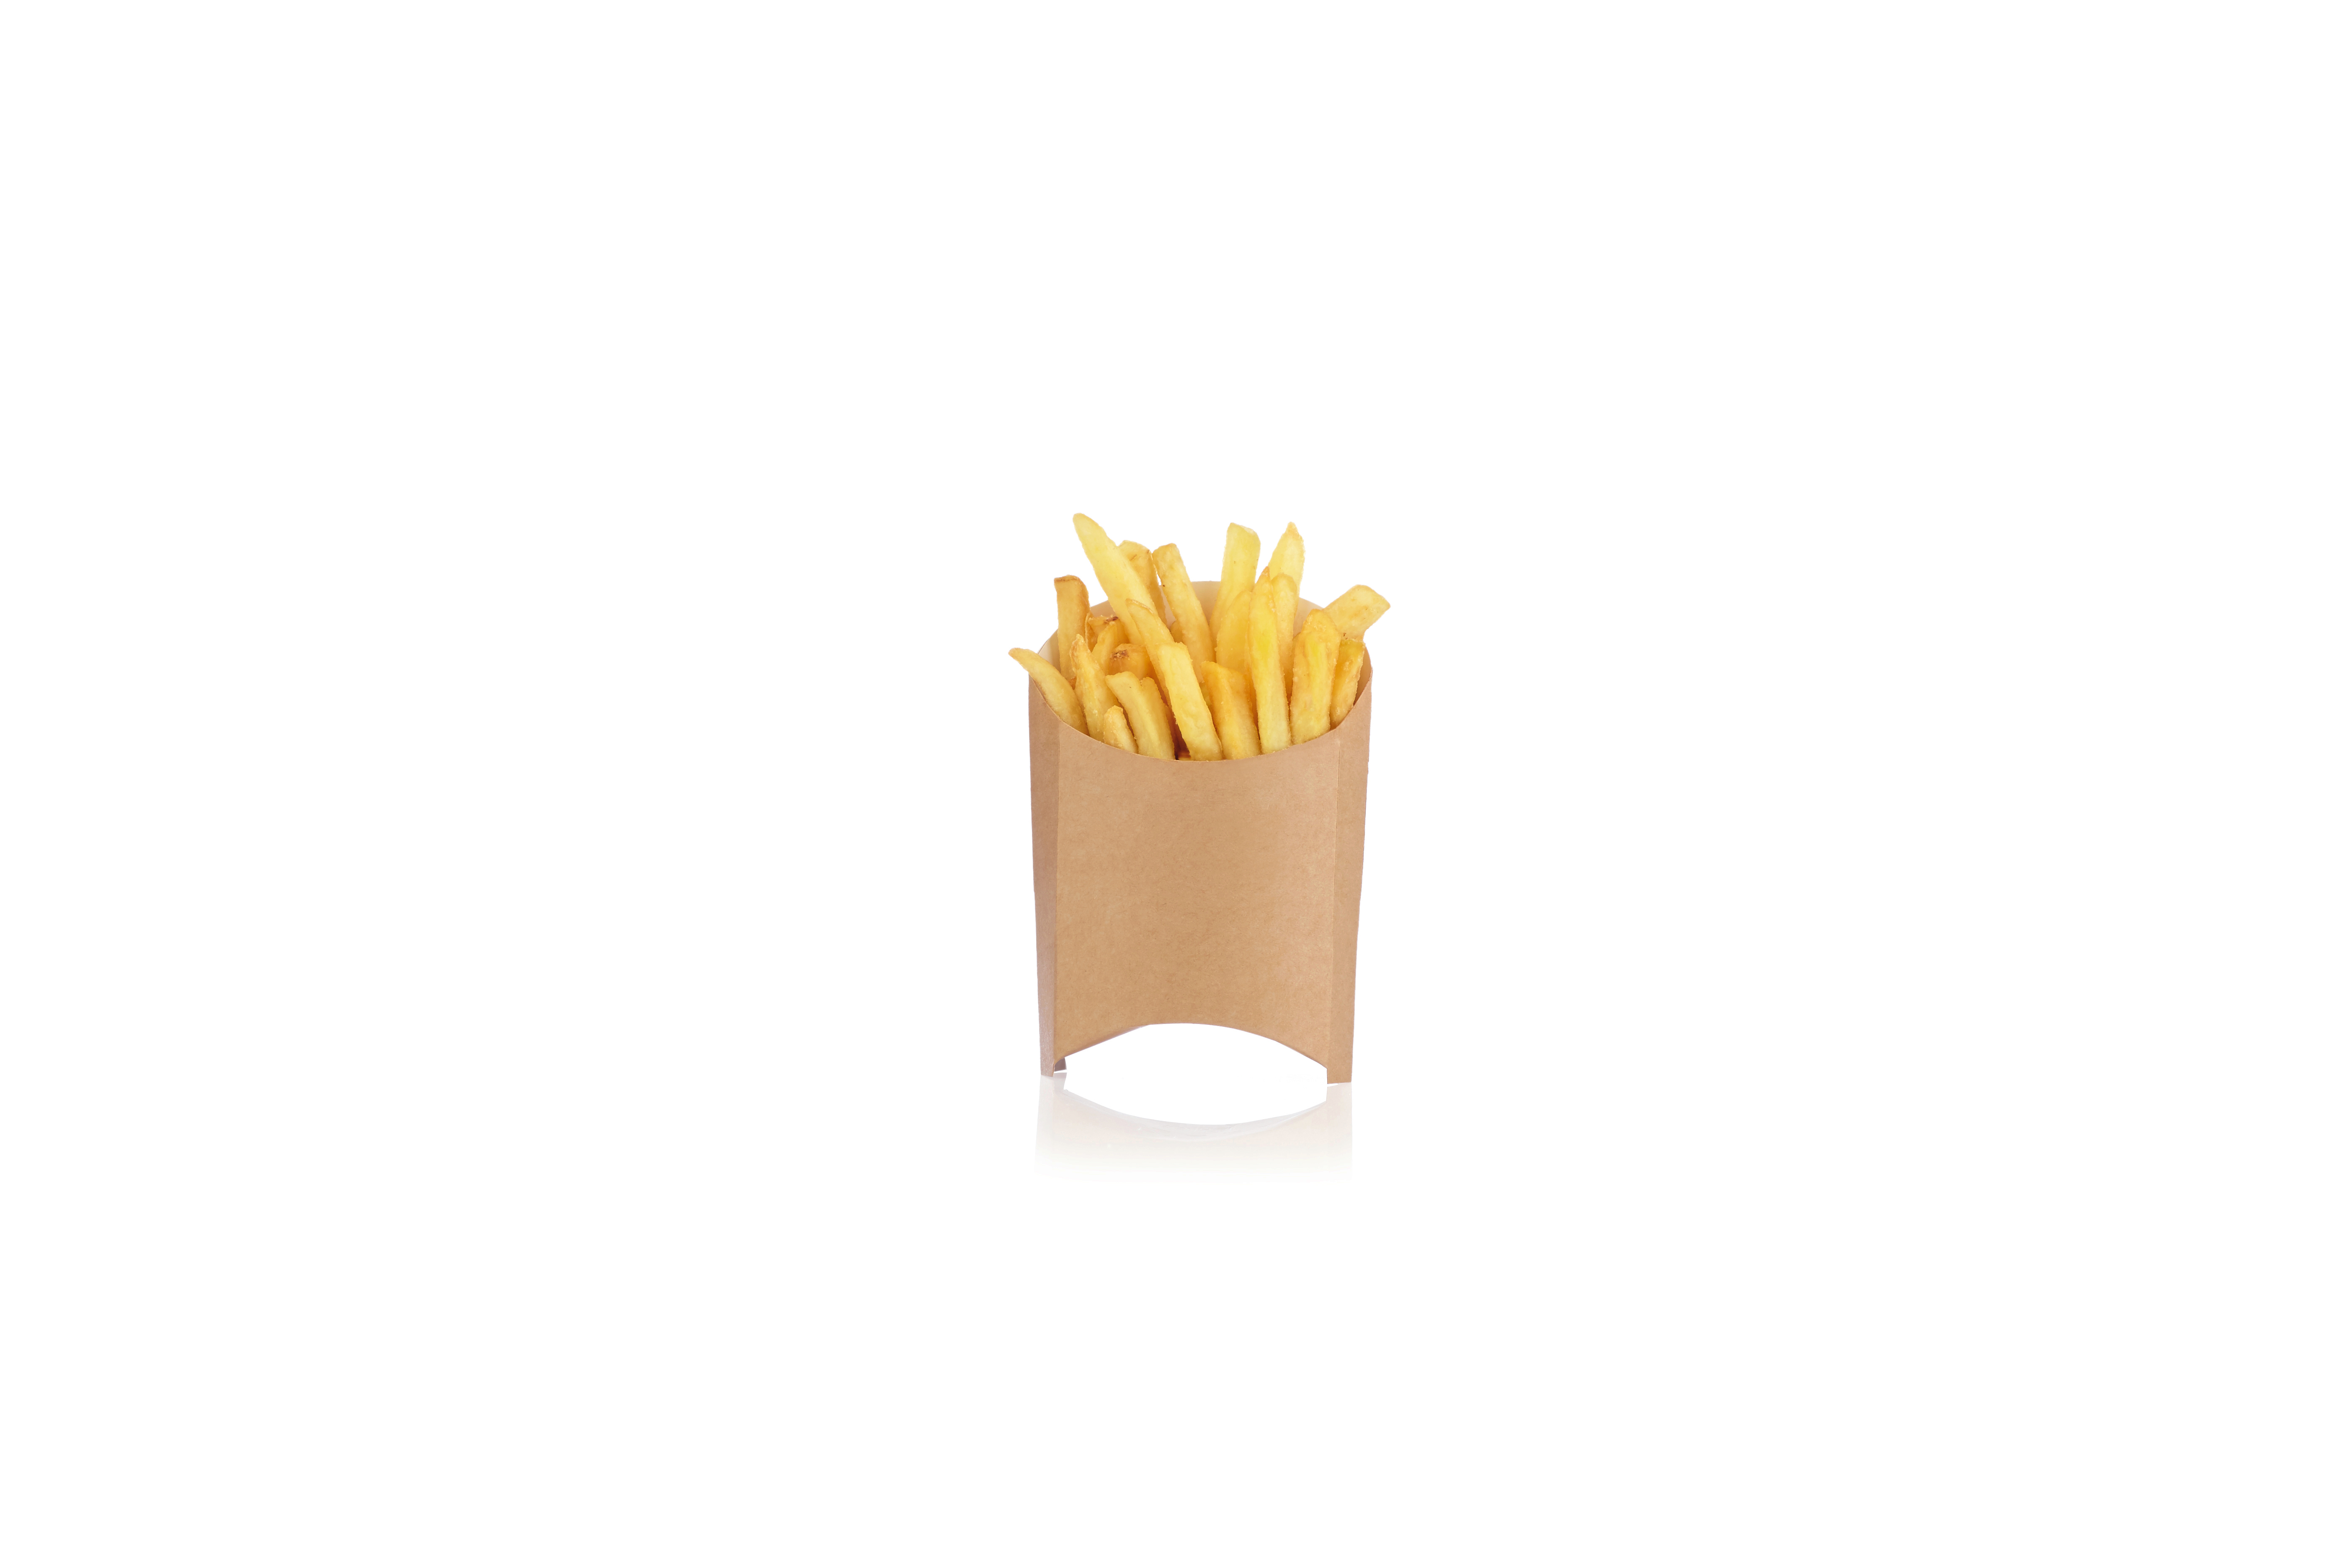 OSQ FRY L packaging for French fries